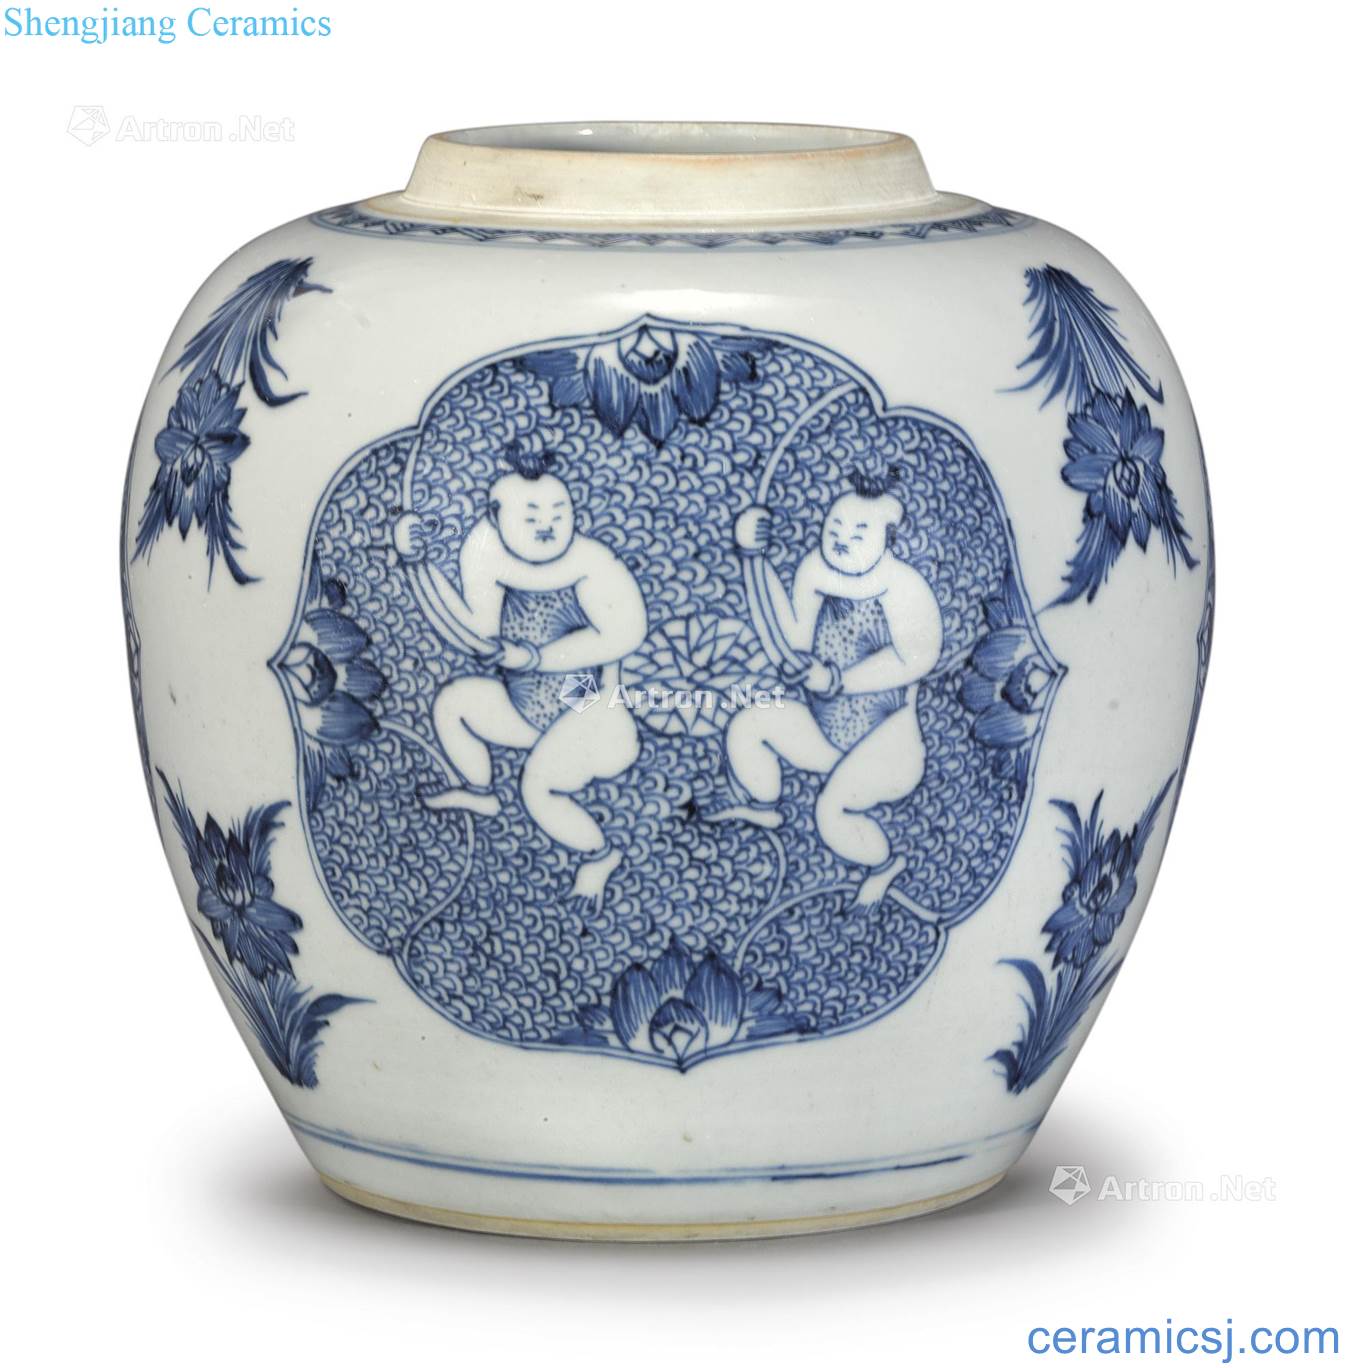 The qing emperor kangxi porcelain medallion even had your ZiWen cans